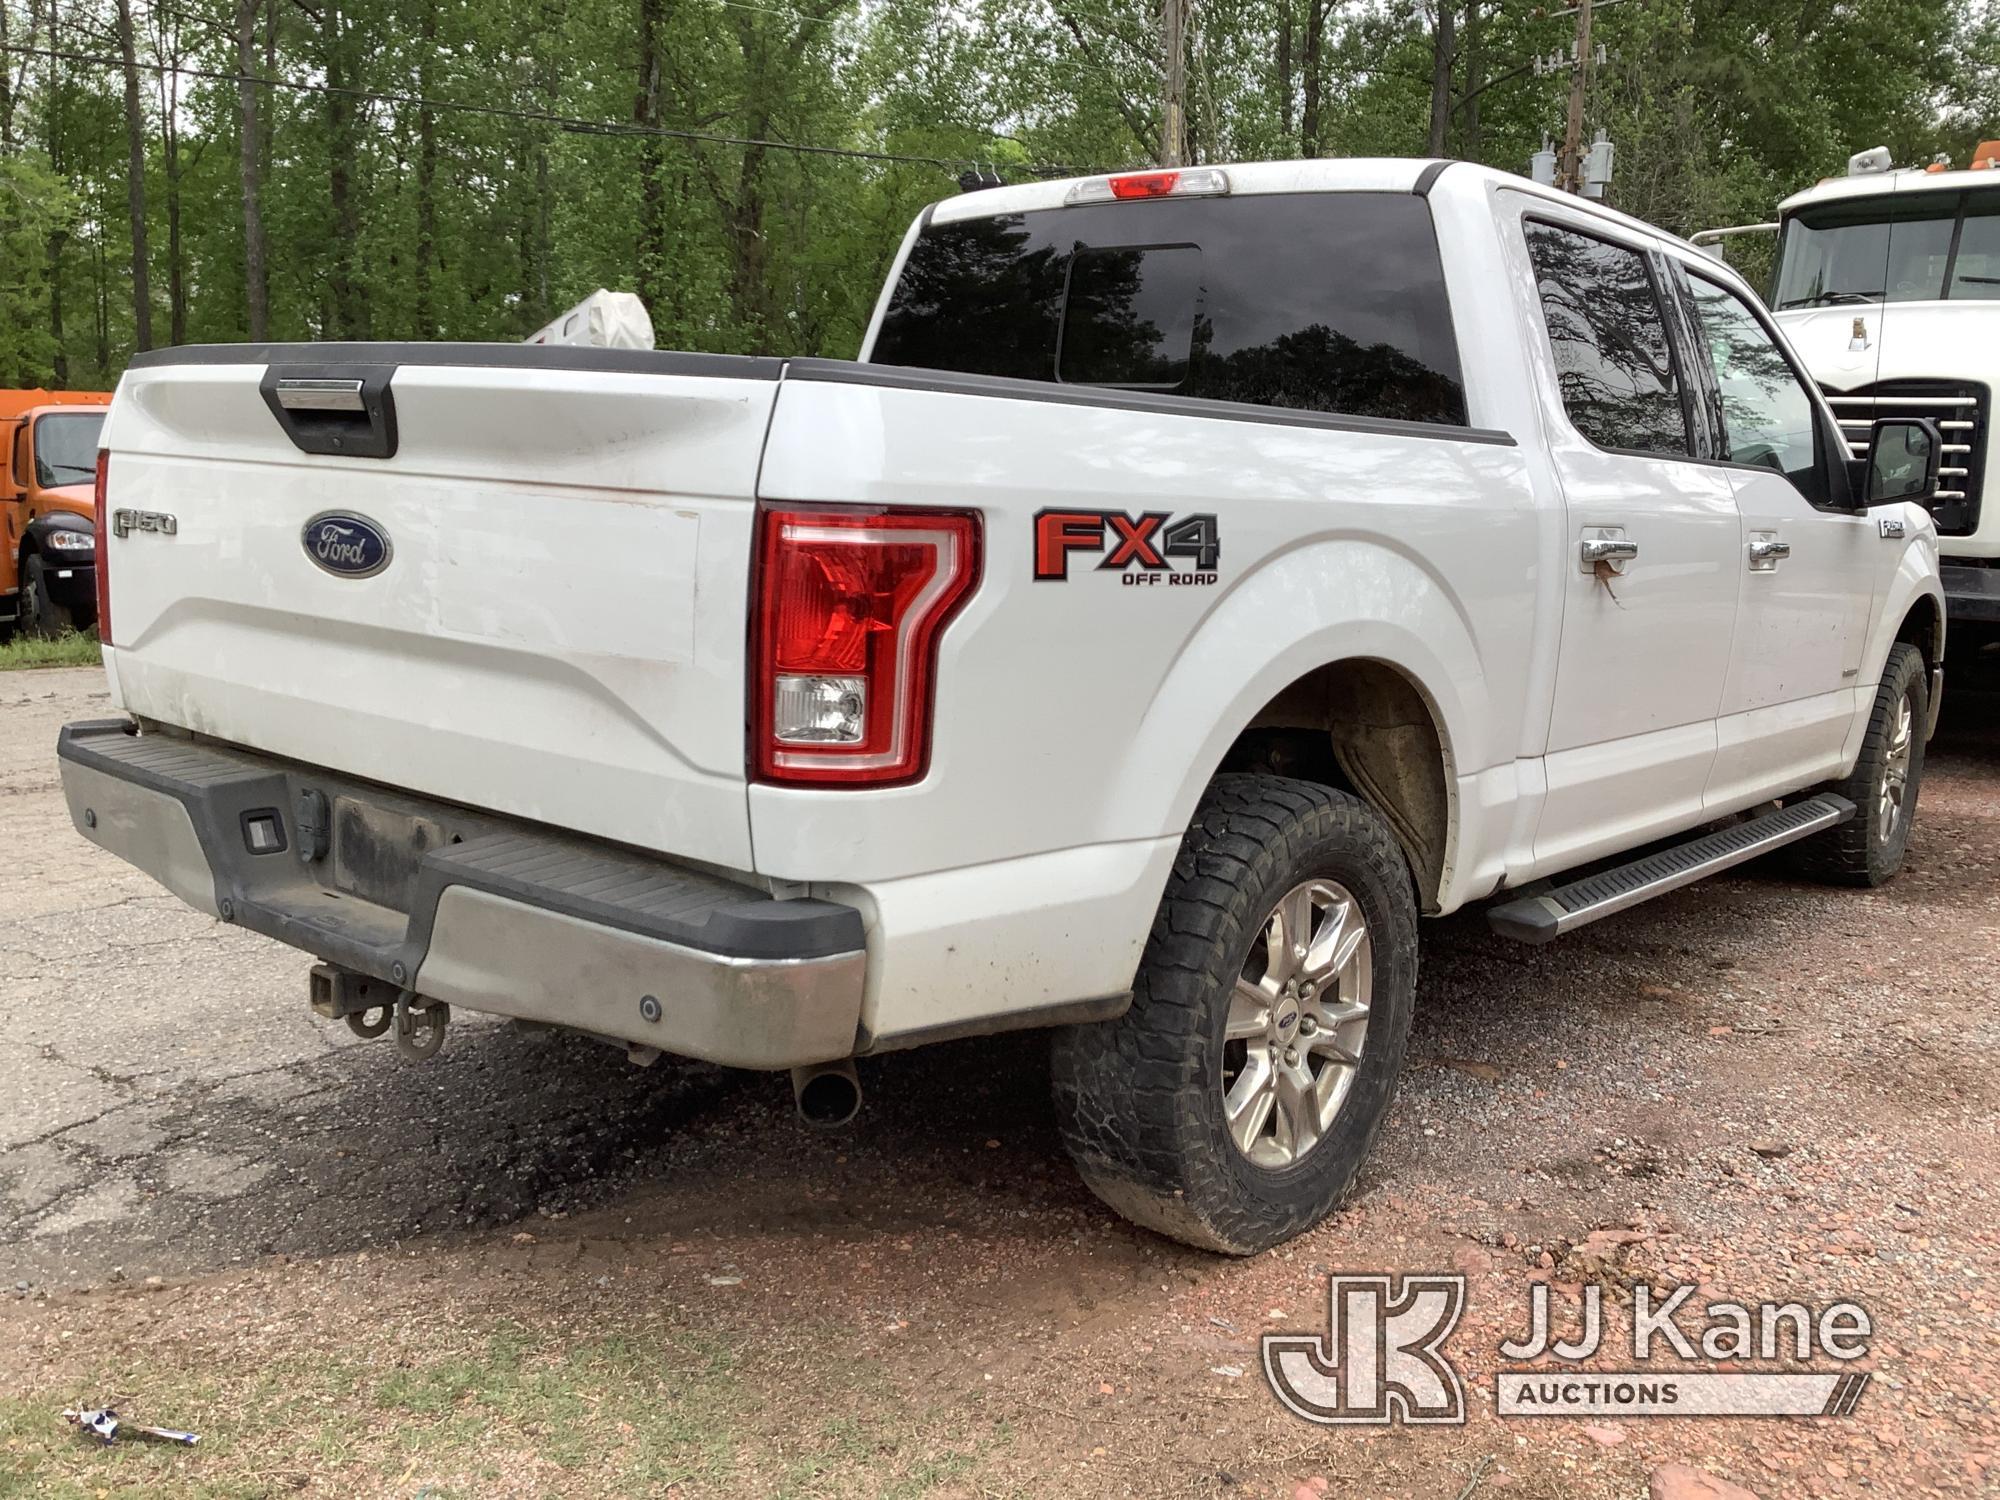 (Graysville, AL) 2017 Ford F150 4x4 Crew-Cab Pickup Truck Not Running, Condition Unknown) (Rear Driv